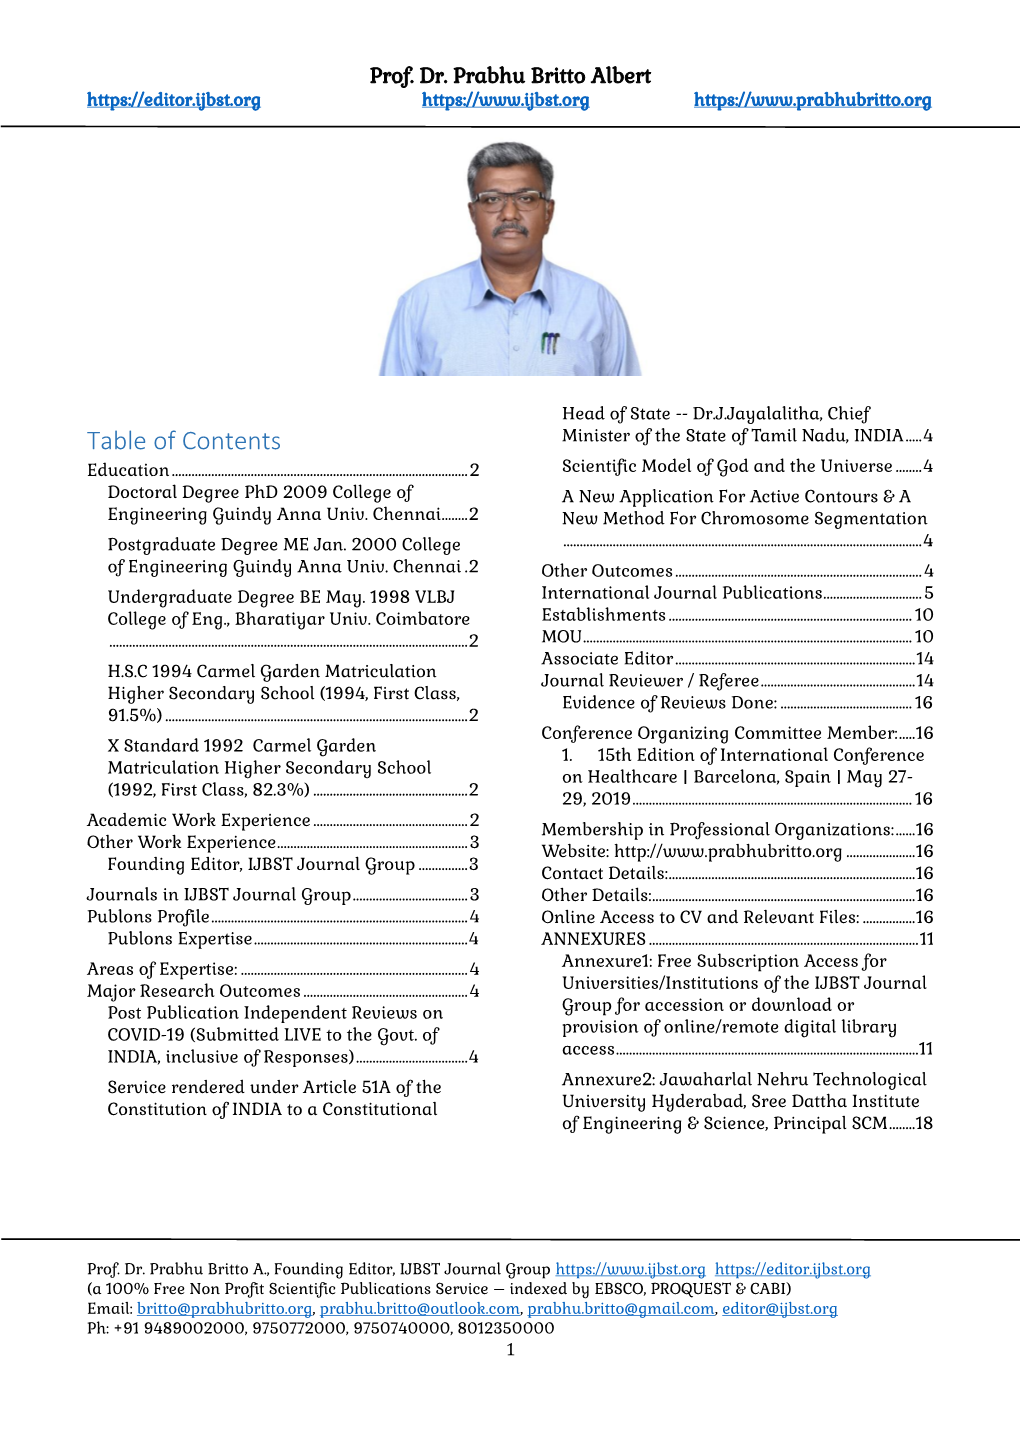 Table of Contents Minister of the State of Tamil Nadu, INDIA